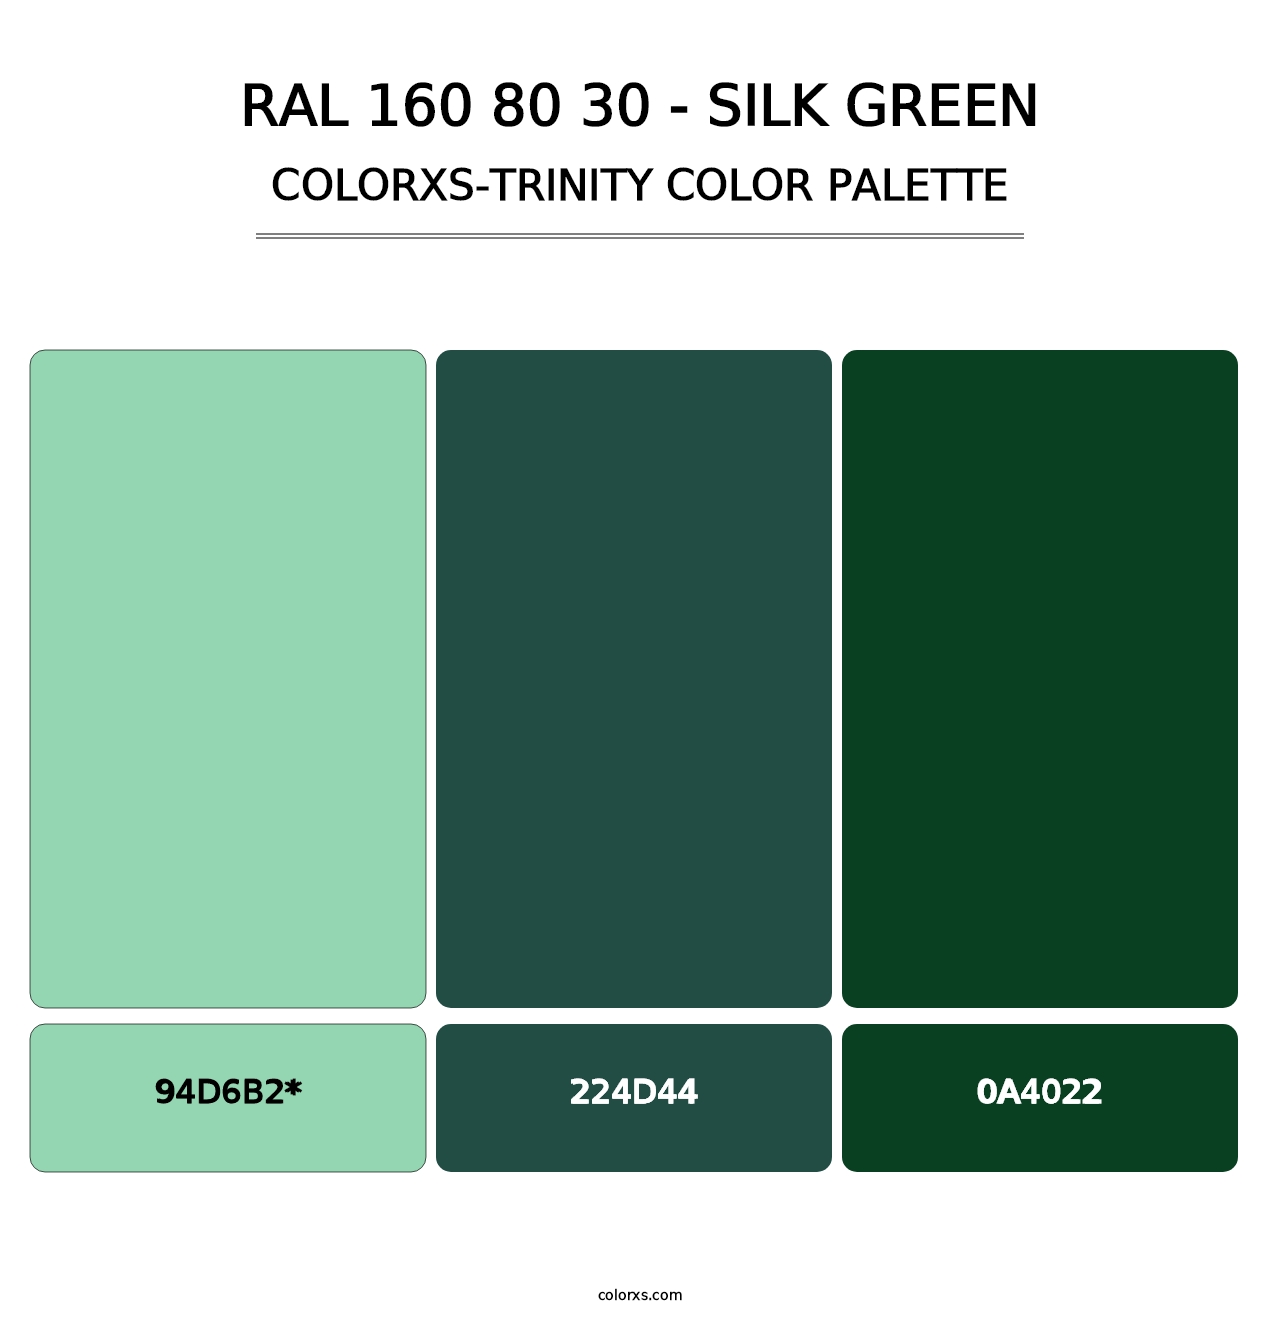 RAL 160 80 30 - Silk Green - Colorxs Trinity Palette